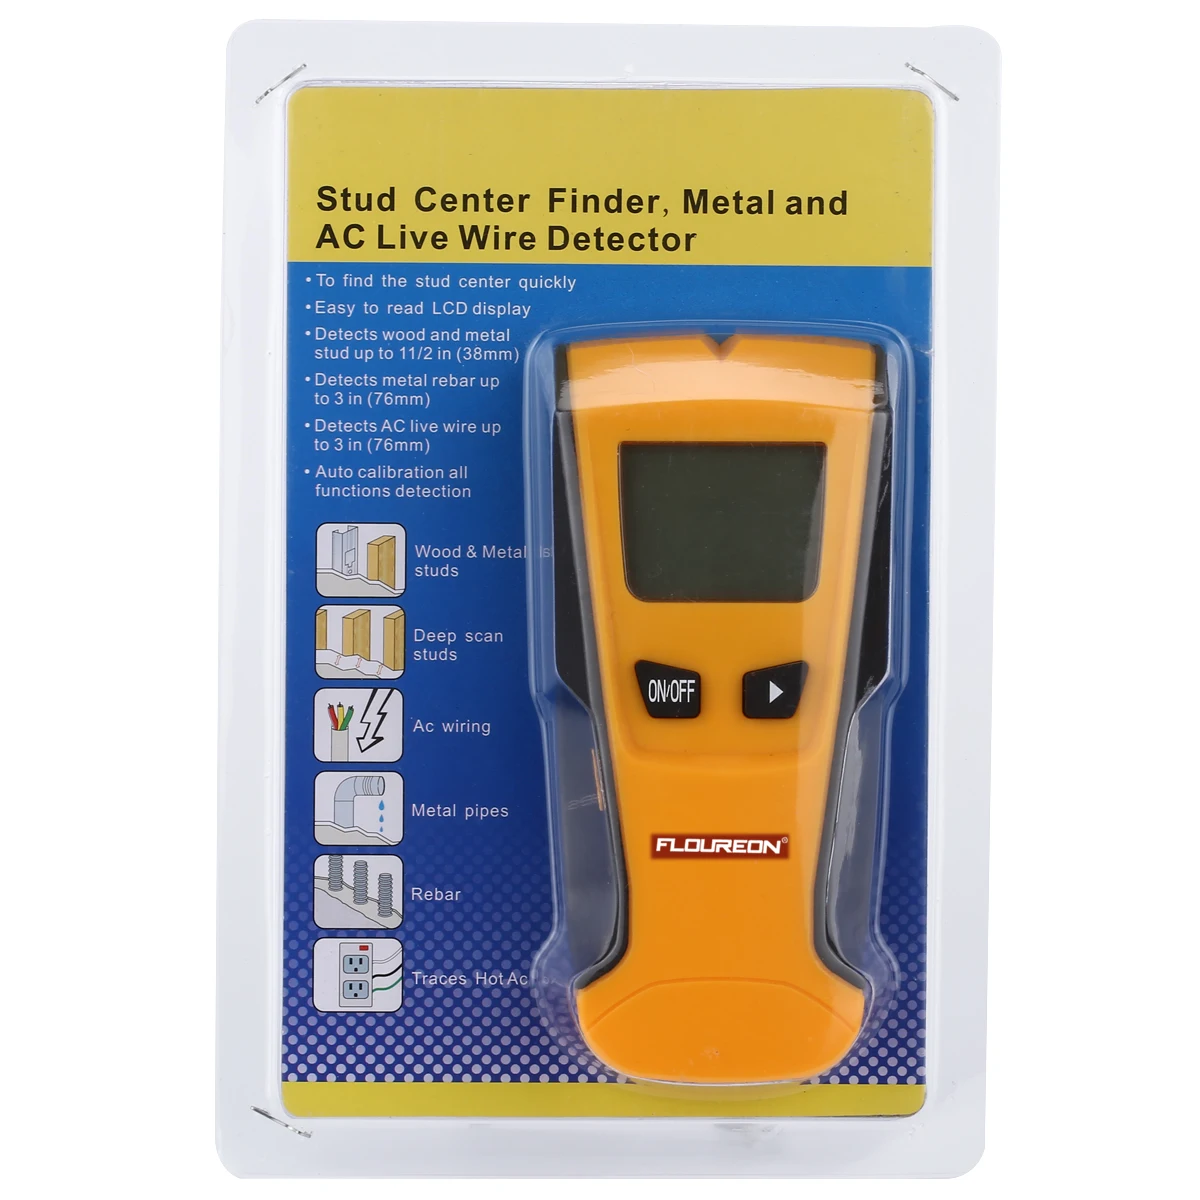 3 Modes Floureon 3-in-1 Multi-function Stud Center Finder Metal Detector,AC Live Wire Measuring Tester with Blacklight LCD Display